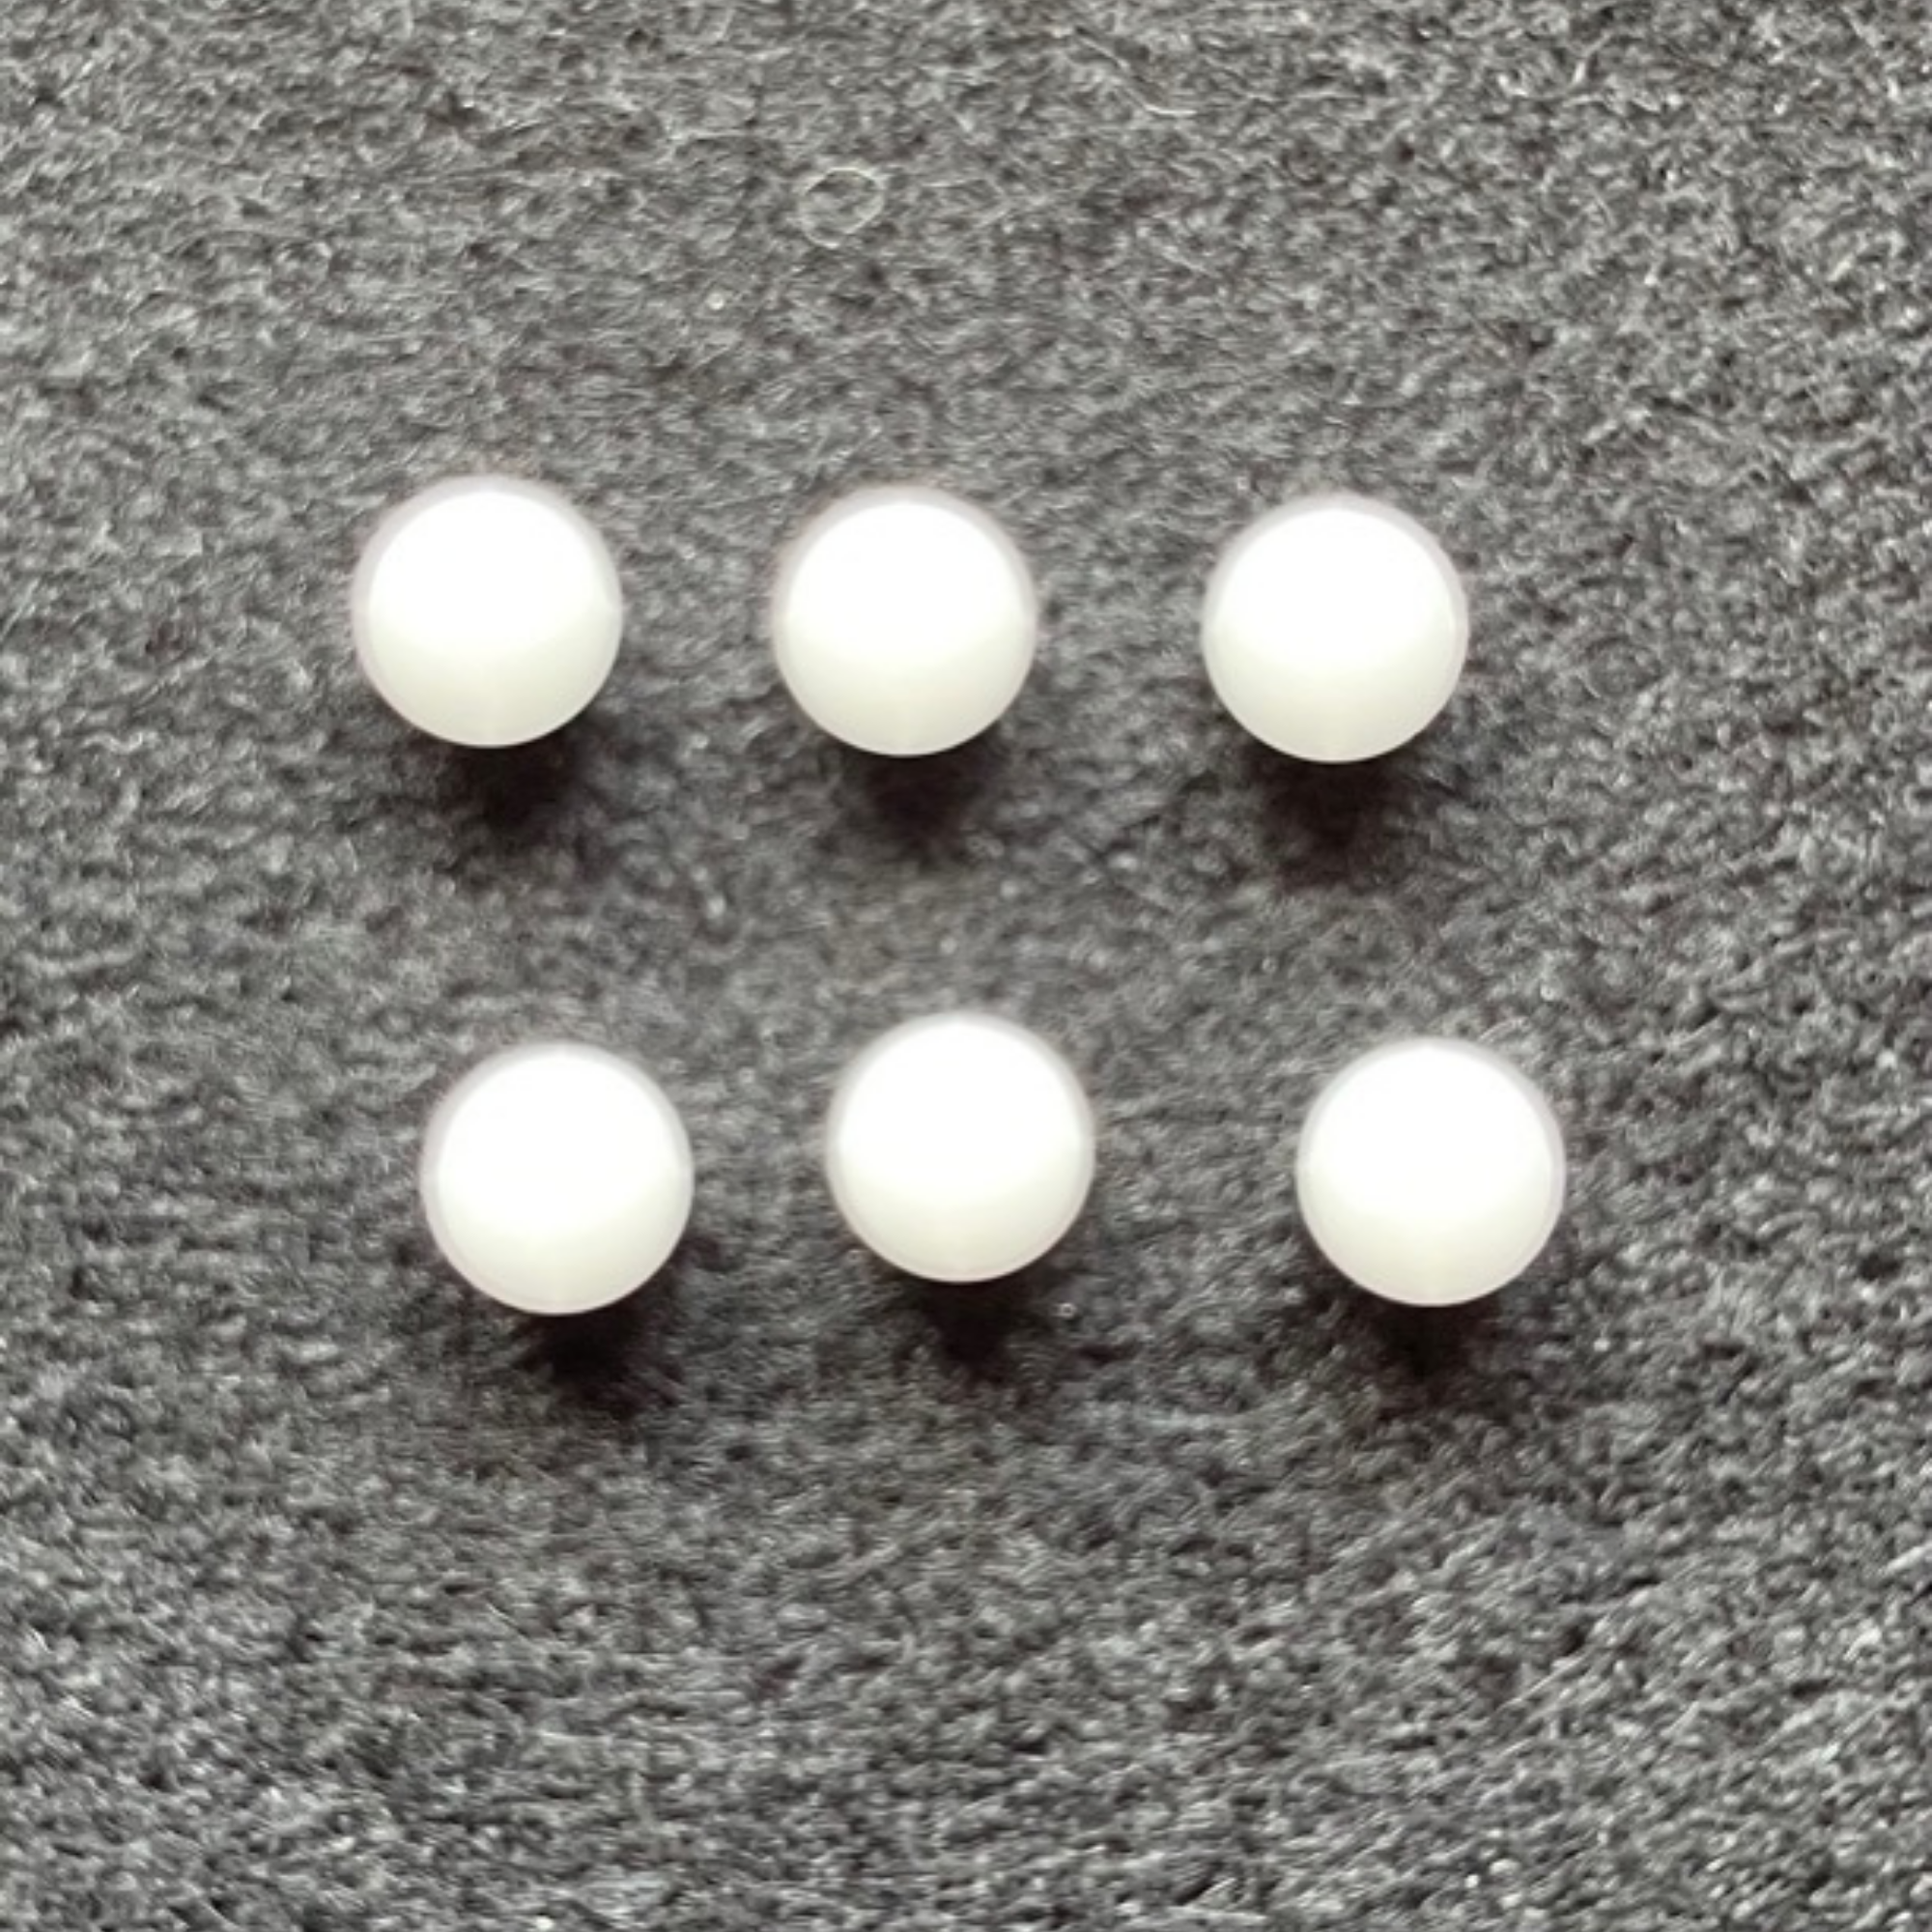 3 Pairs of White Hard Plastic Balls - 6mm  PERFECT FOR HAND PAINTED DOLL'S EYES